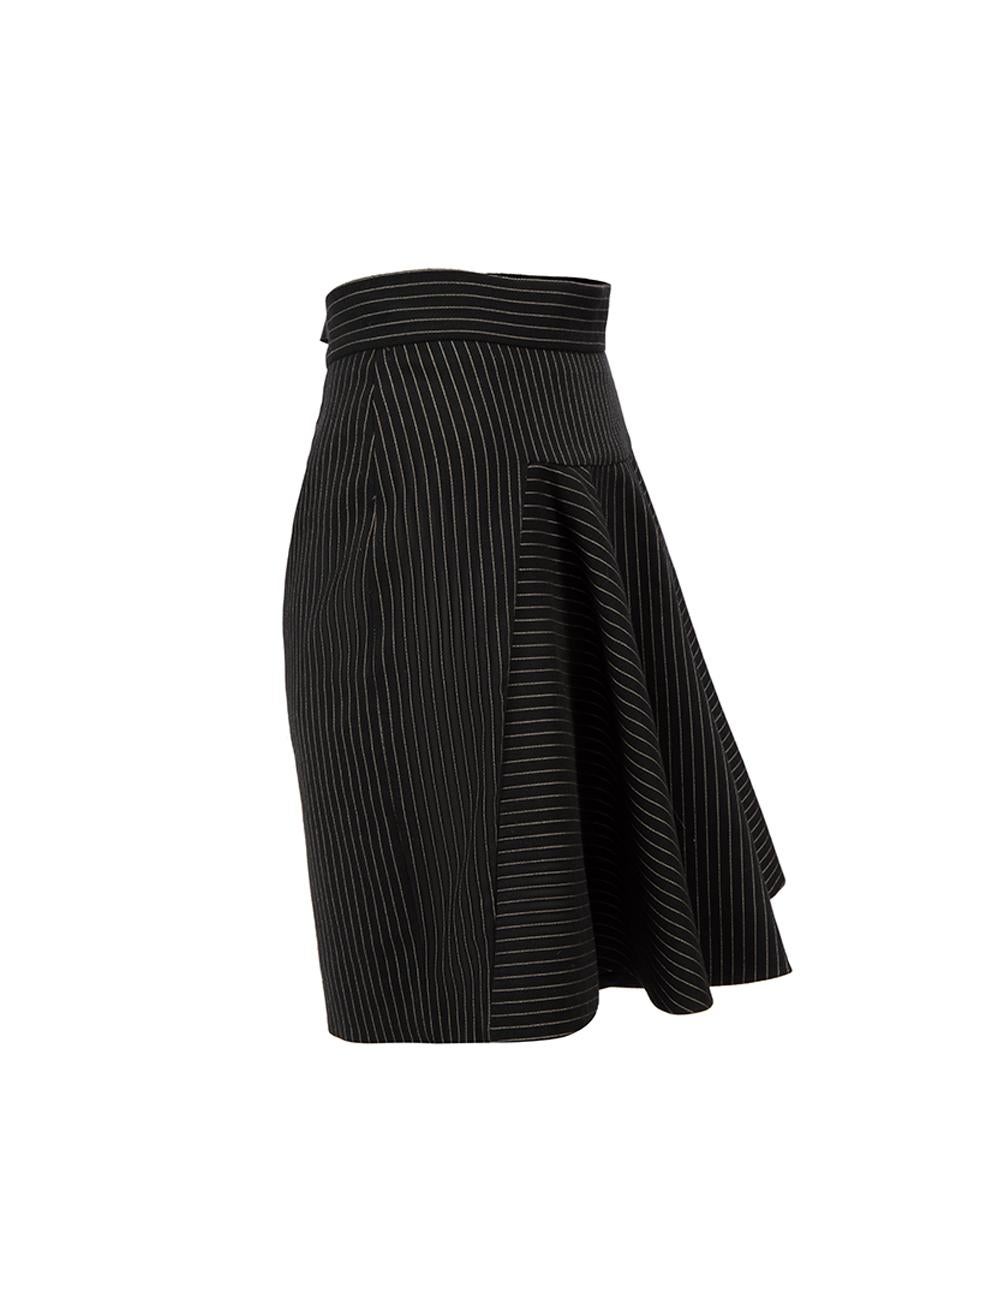 CONDITION is Very good. Hardly any visible wear to skirt is evident on this used Stella McCartney designer resale item. 



Details


Black

Wool

Mini skirt

Pinstriped pattern

Front flared panel

Back zip closure with hook and eye





Made in